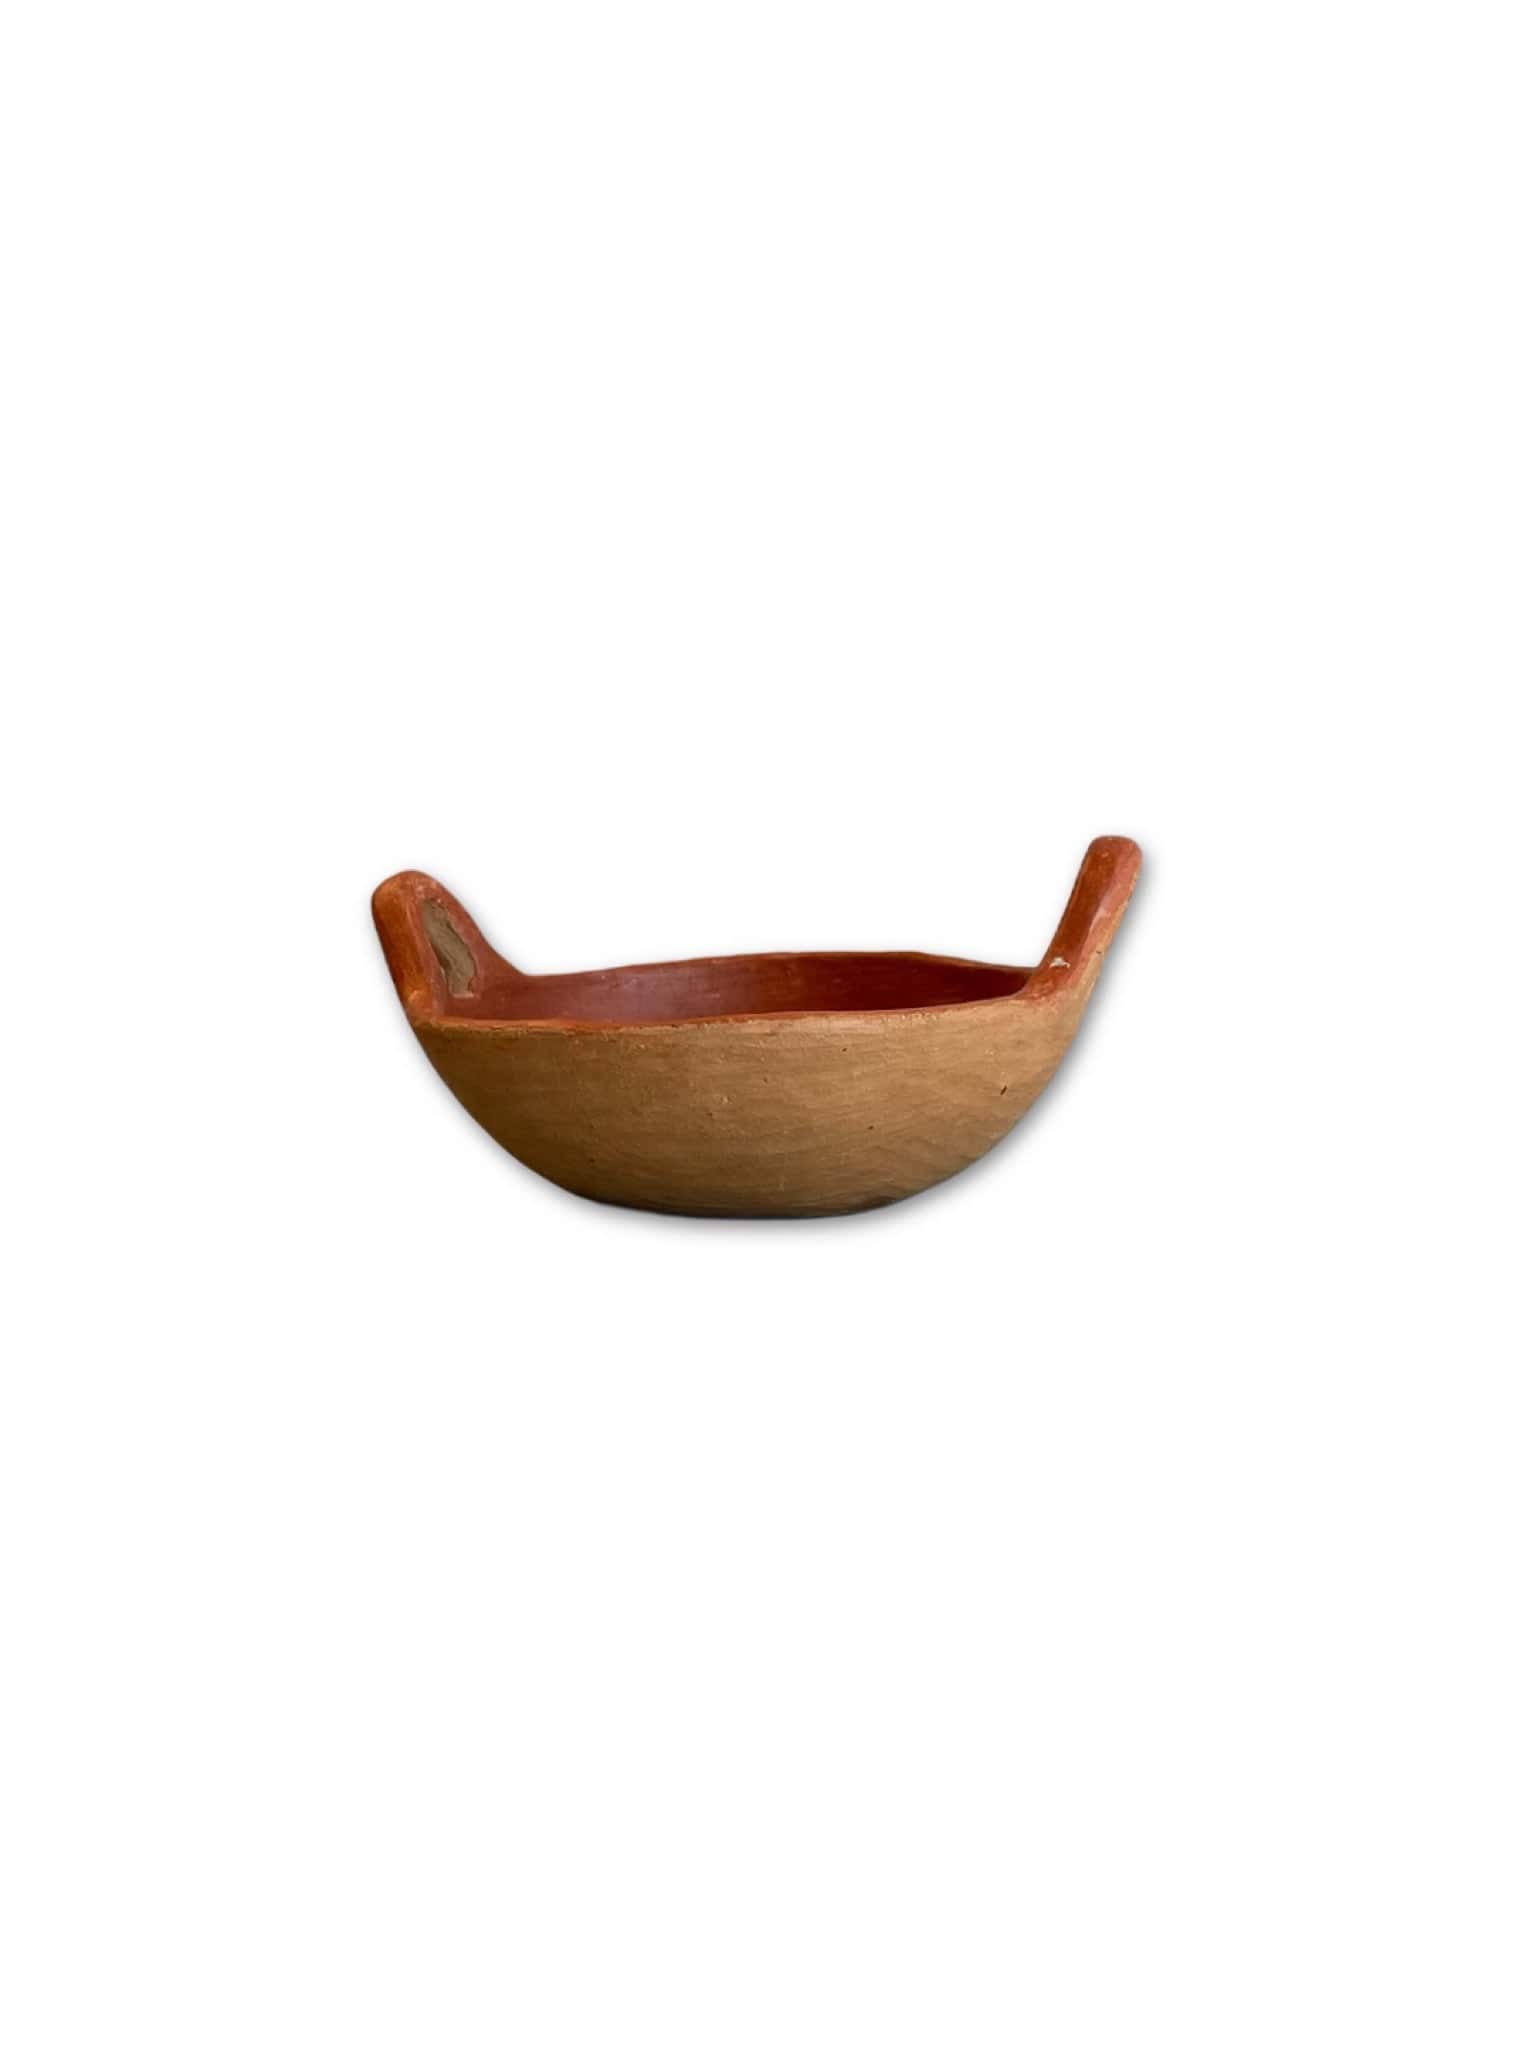 Case Study Objects Brown/red clay bowl with handles La Bomba Floristry Vancouver Canada